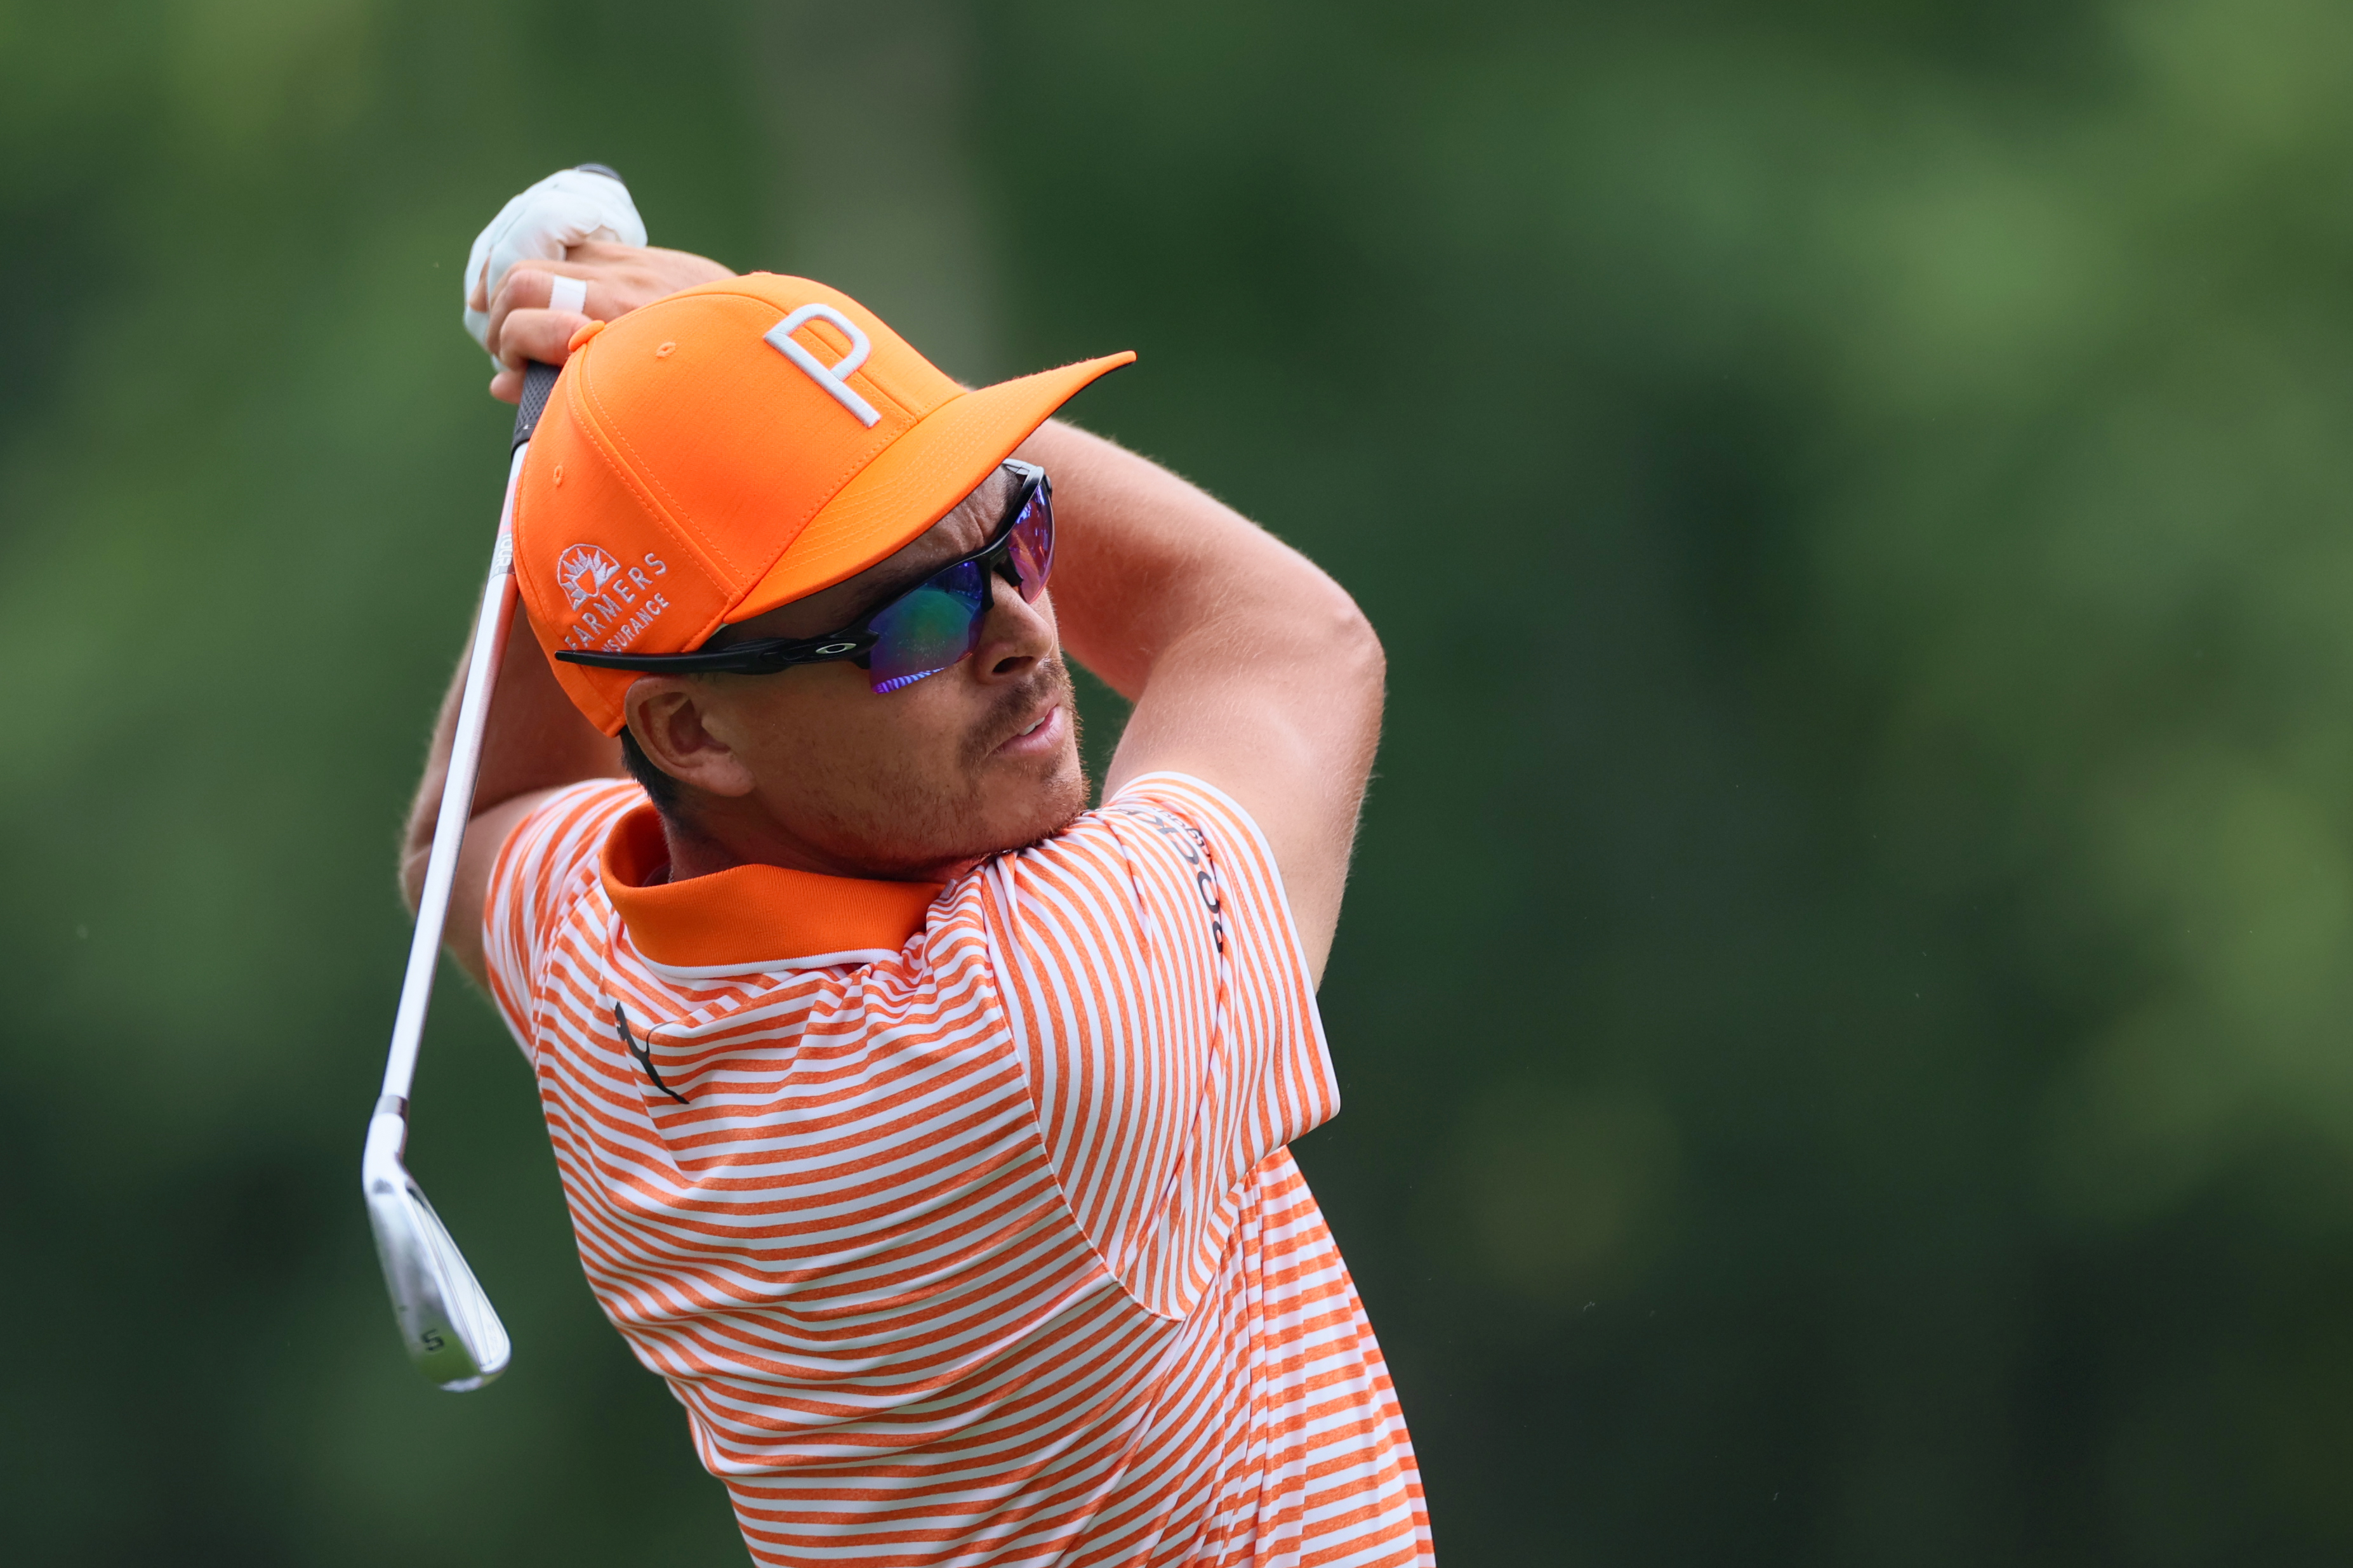 The clubs Rickie Fowler used to win the 2023 Rocket Mortgage Classic Golf Equipment Clubs, Balls, Bags Golf Digest